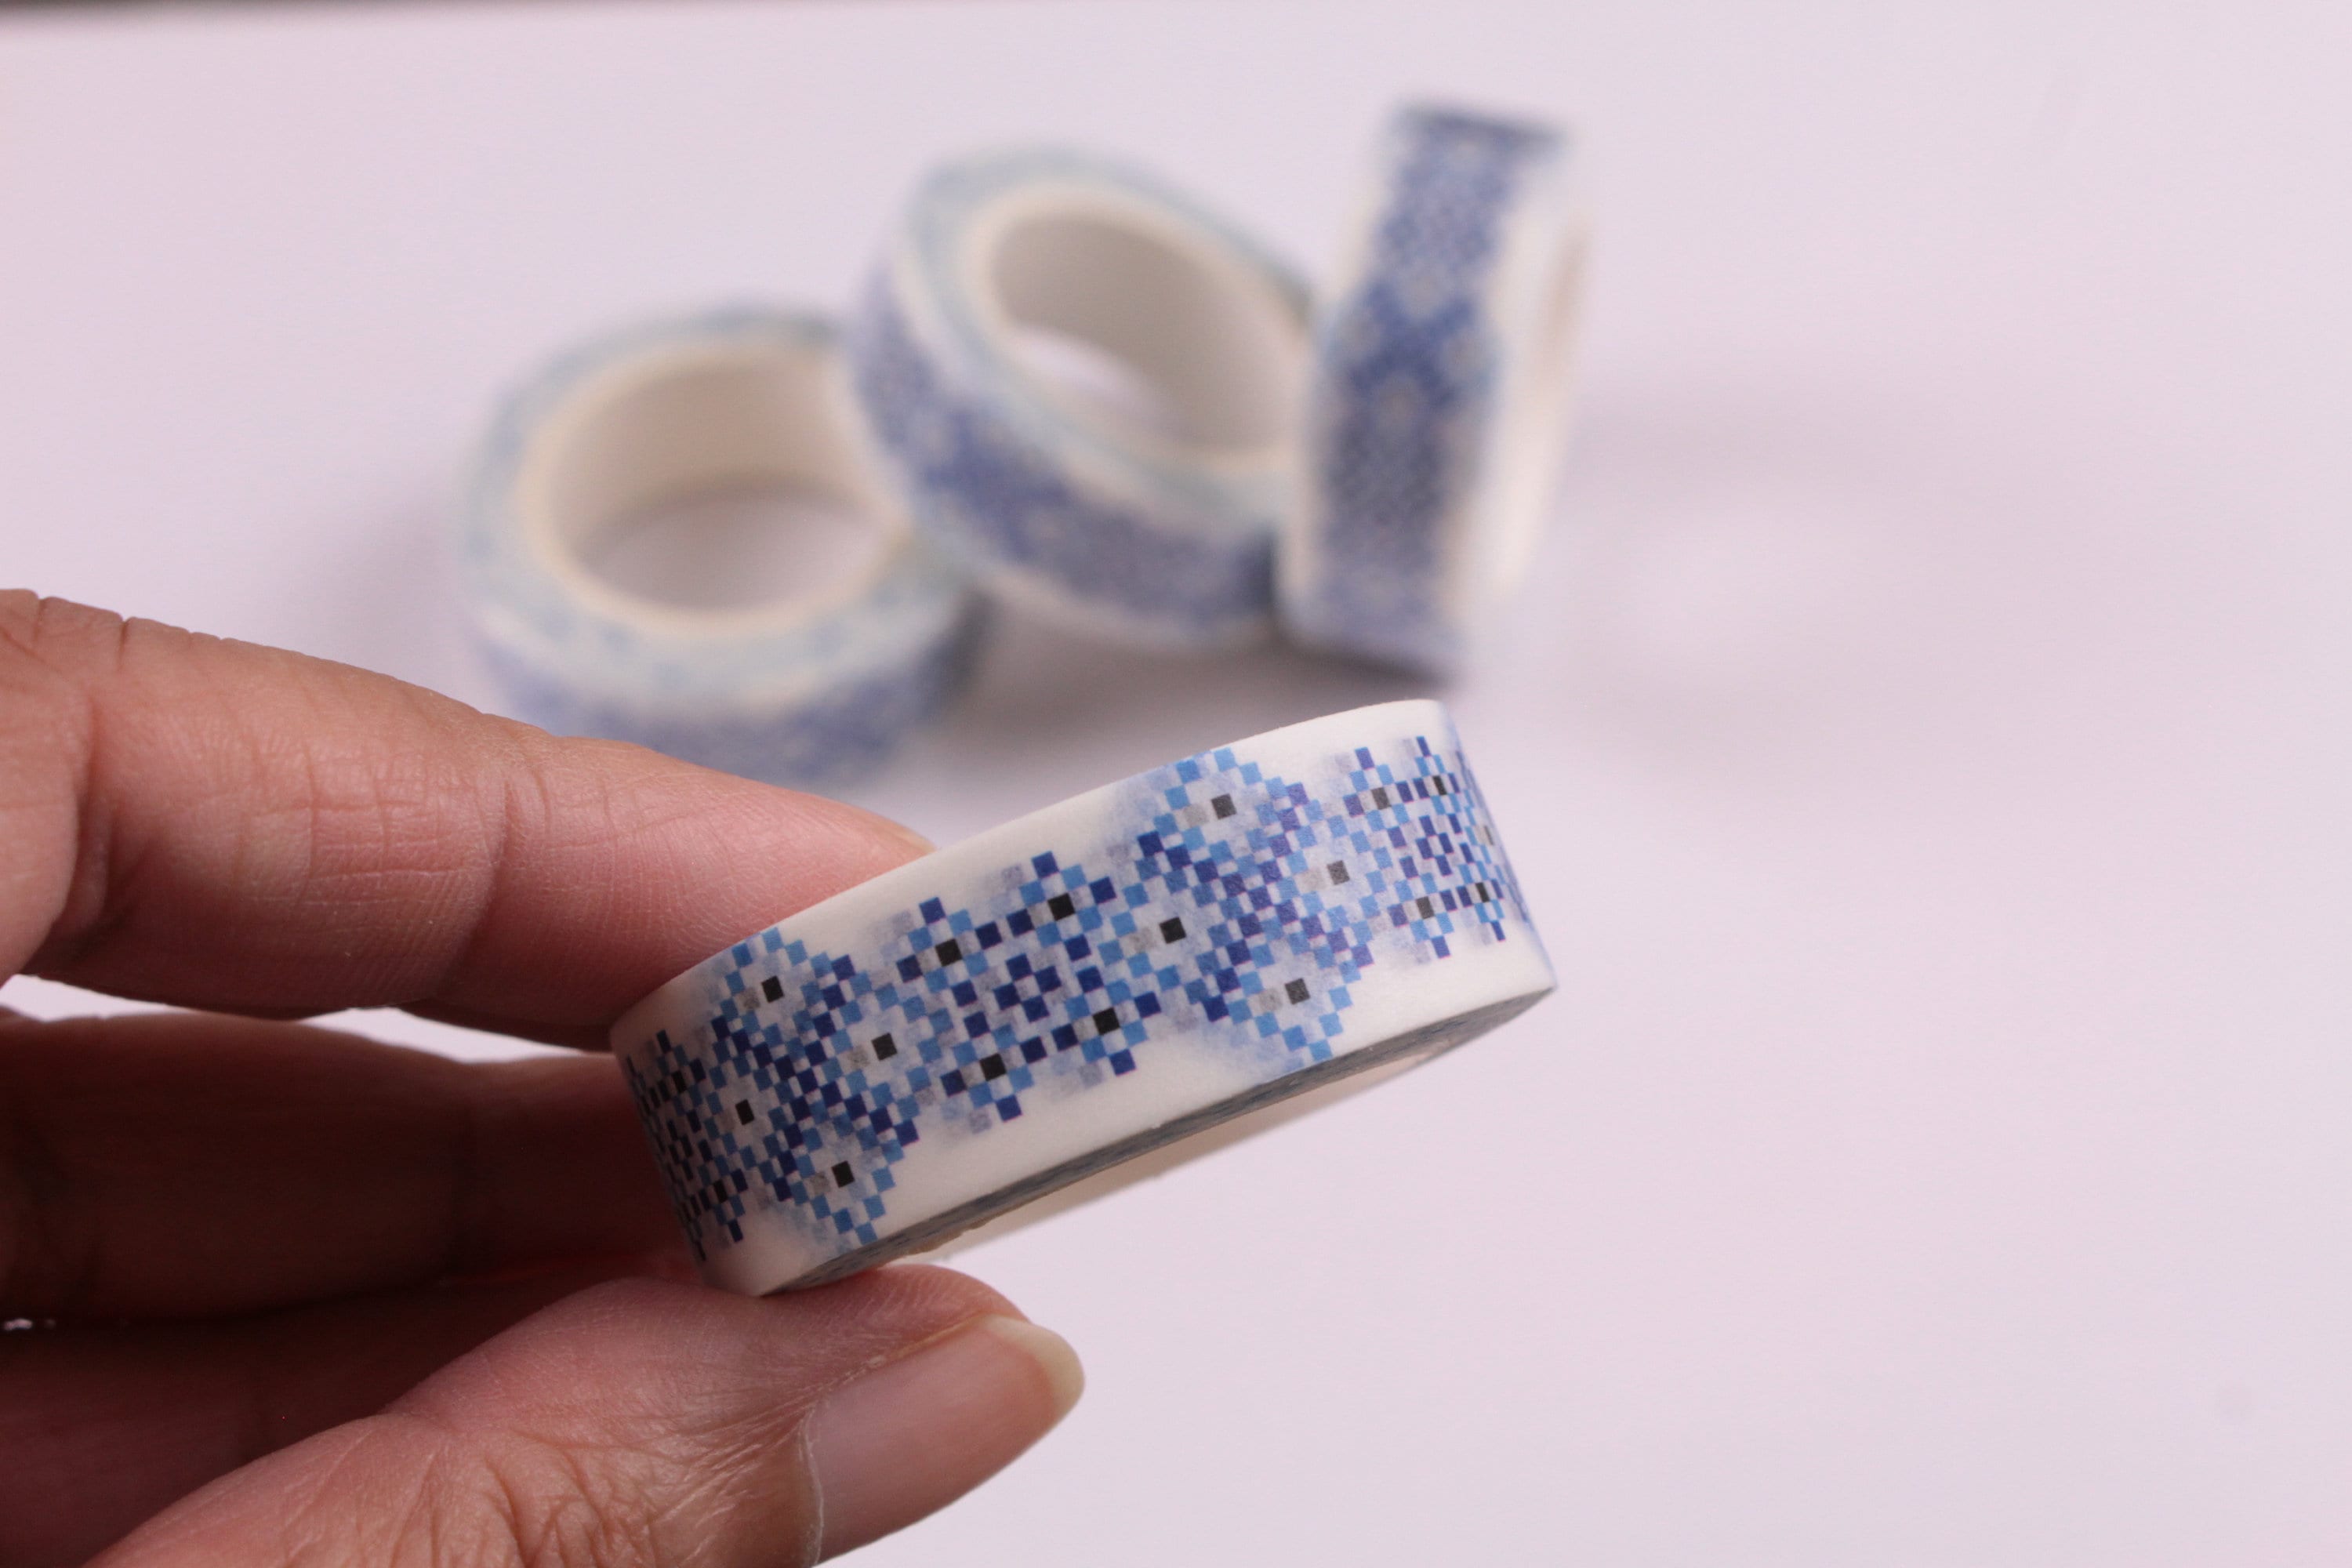 Glue Tape Roller, Double Sided Glue Tape, Clear Glue Tape for Art